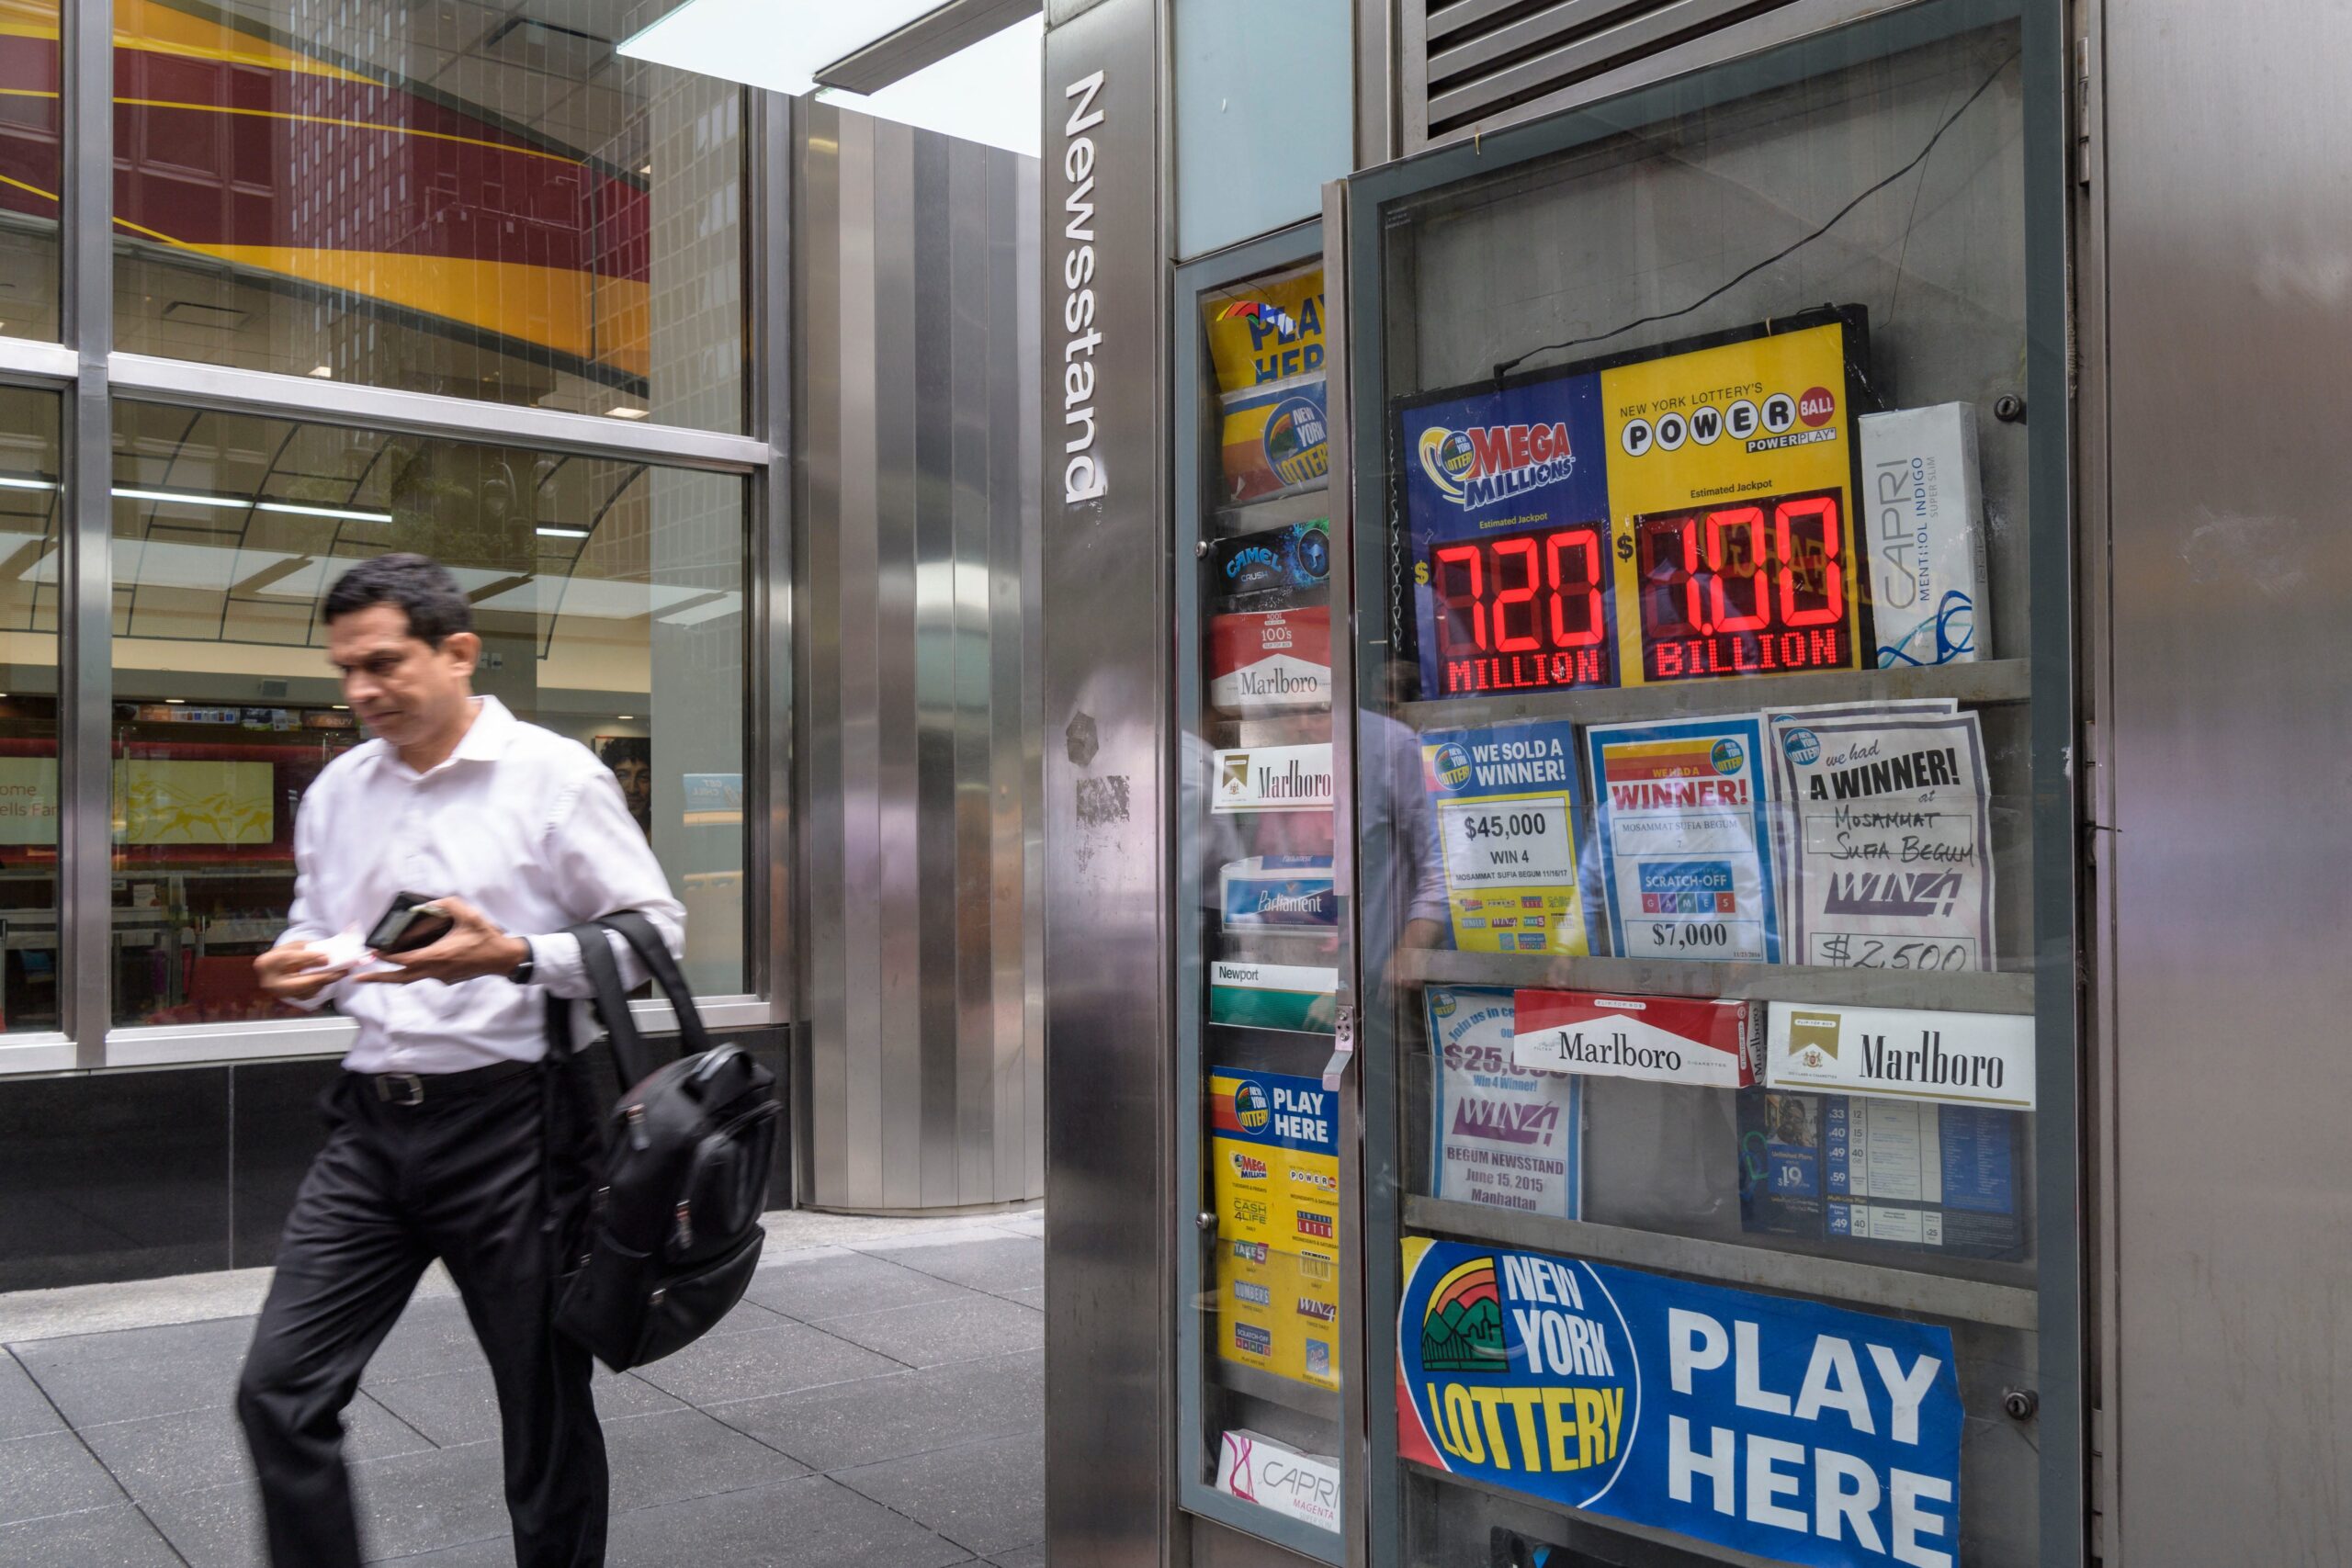 Lotto regret: Pitfalls of Powerball, lottery winners serve as cautionary tales as jackpots swell